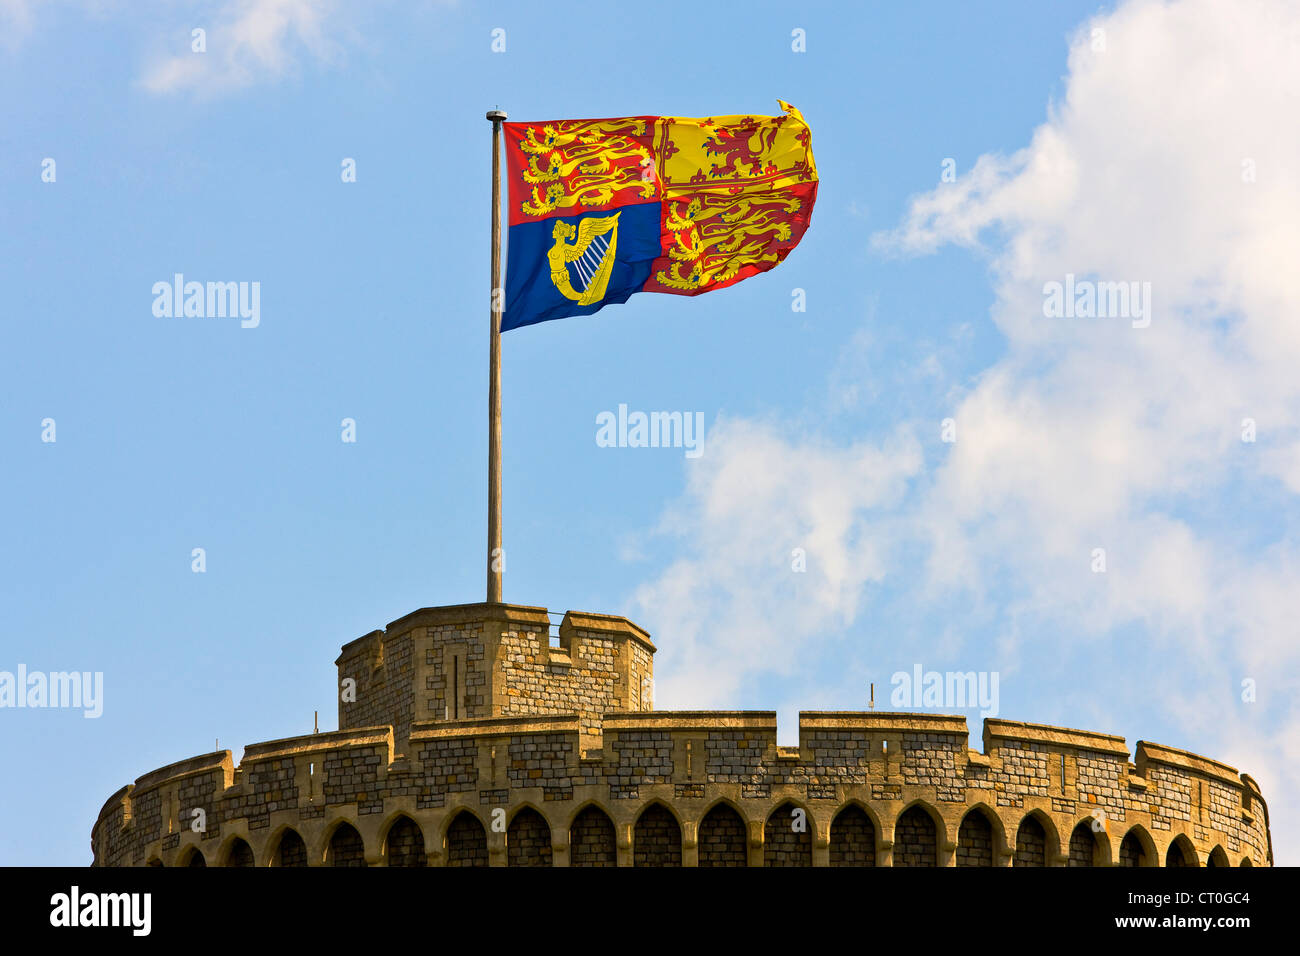 Special large ceremonial Royal Standard flag flying from the Round Tower or keep at Windsor Castle. JMH6021 Stock Photo